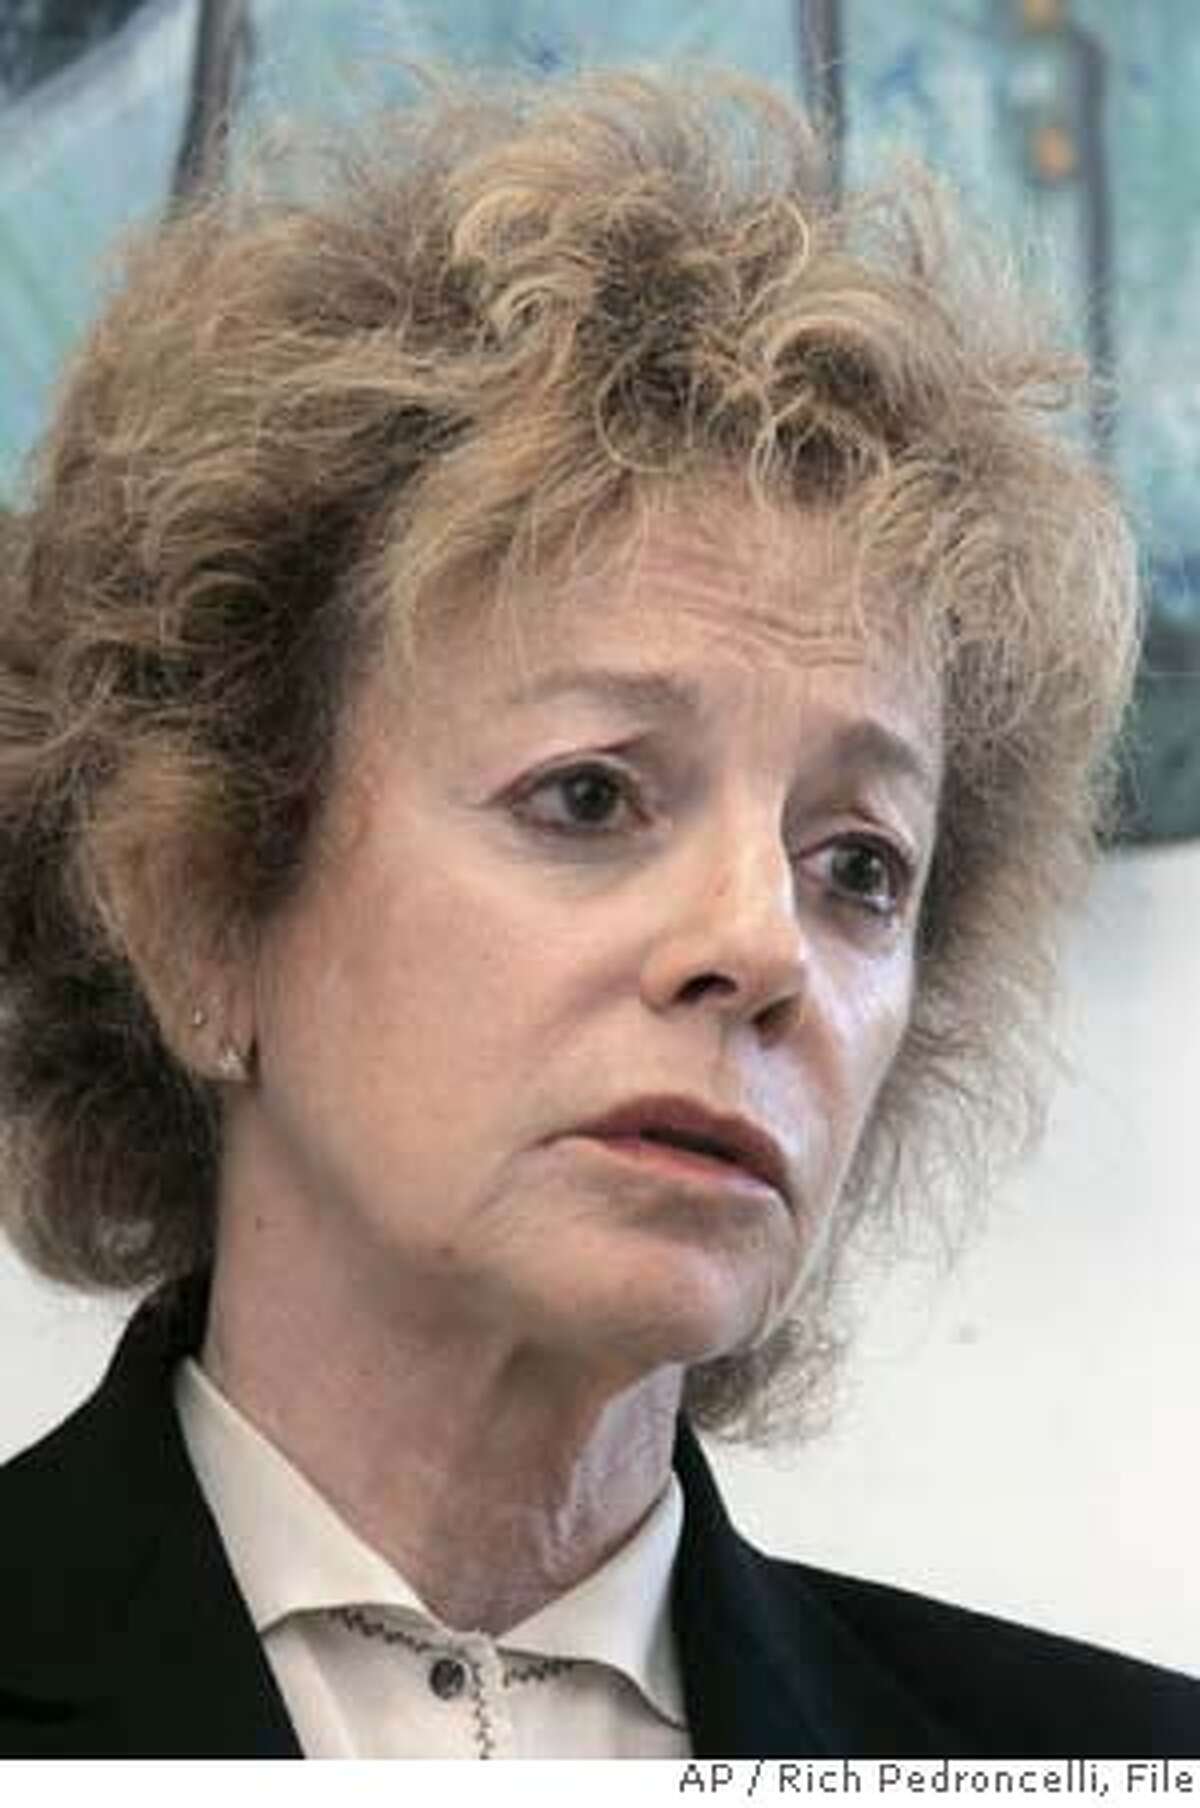 ###Live Caption:**FILE** State Sen. Carole Migden, D-San Francisco, is seen during an interview with the Associated Press at her office in Sacramento, Calif., in this Thursday, May 24, 2007, file photo. The Fair Political Practices Commission, California's political watch dog agency, filed a $9 million lawsuit Tuesday, March 25, 2008, against Migden, accusing her of consistent and deliberate violations of the state's campaign finance laws. (AP Photo/Rich Pedroncelli)###Caption History:**FILE** State Sen. Carole Migden, D-San Francisco, is seen during an interview with the Associated Press at her office in Sacramento, Calif., in this Thursday, May 24, 2007, file photo. The Fair Political Practices Commission, California's political watch dog agency, filed a $9 million lawsuit Tuesday, March 25, 2008, against Migden, accusing her of consistent and deliberate violations of the state's campaign finance laws. (AP Photo/Rich Pedroncelli)###Notes:Carole Migden###Special Instructions:MAY 24, 2007 FILE PHOTO